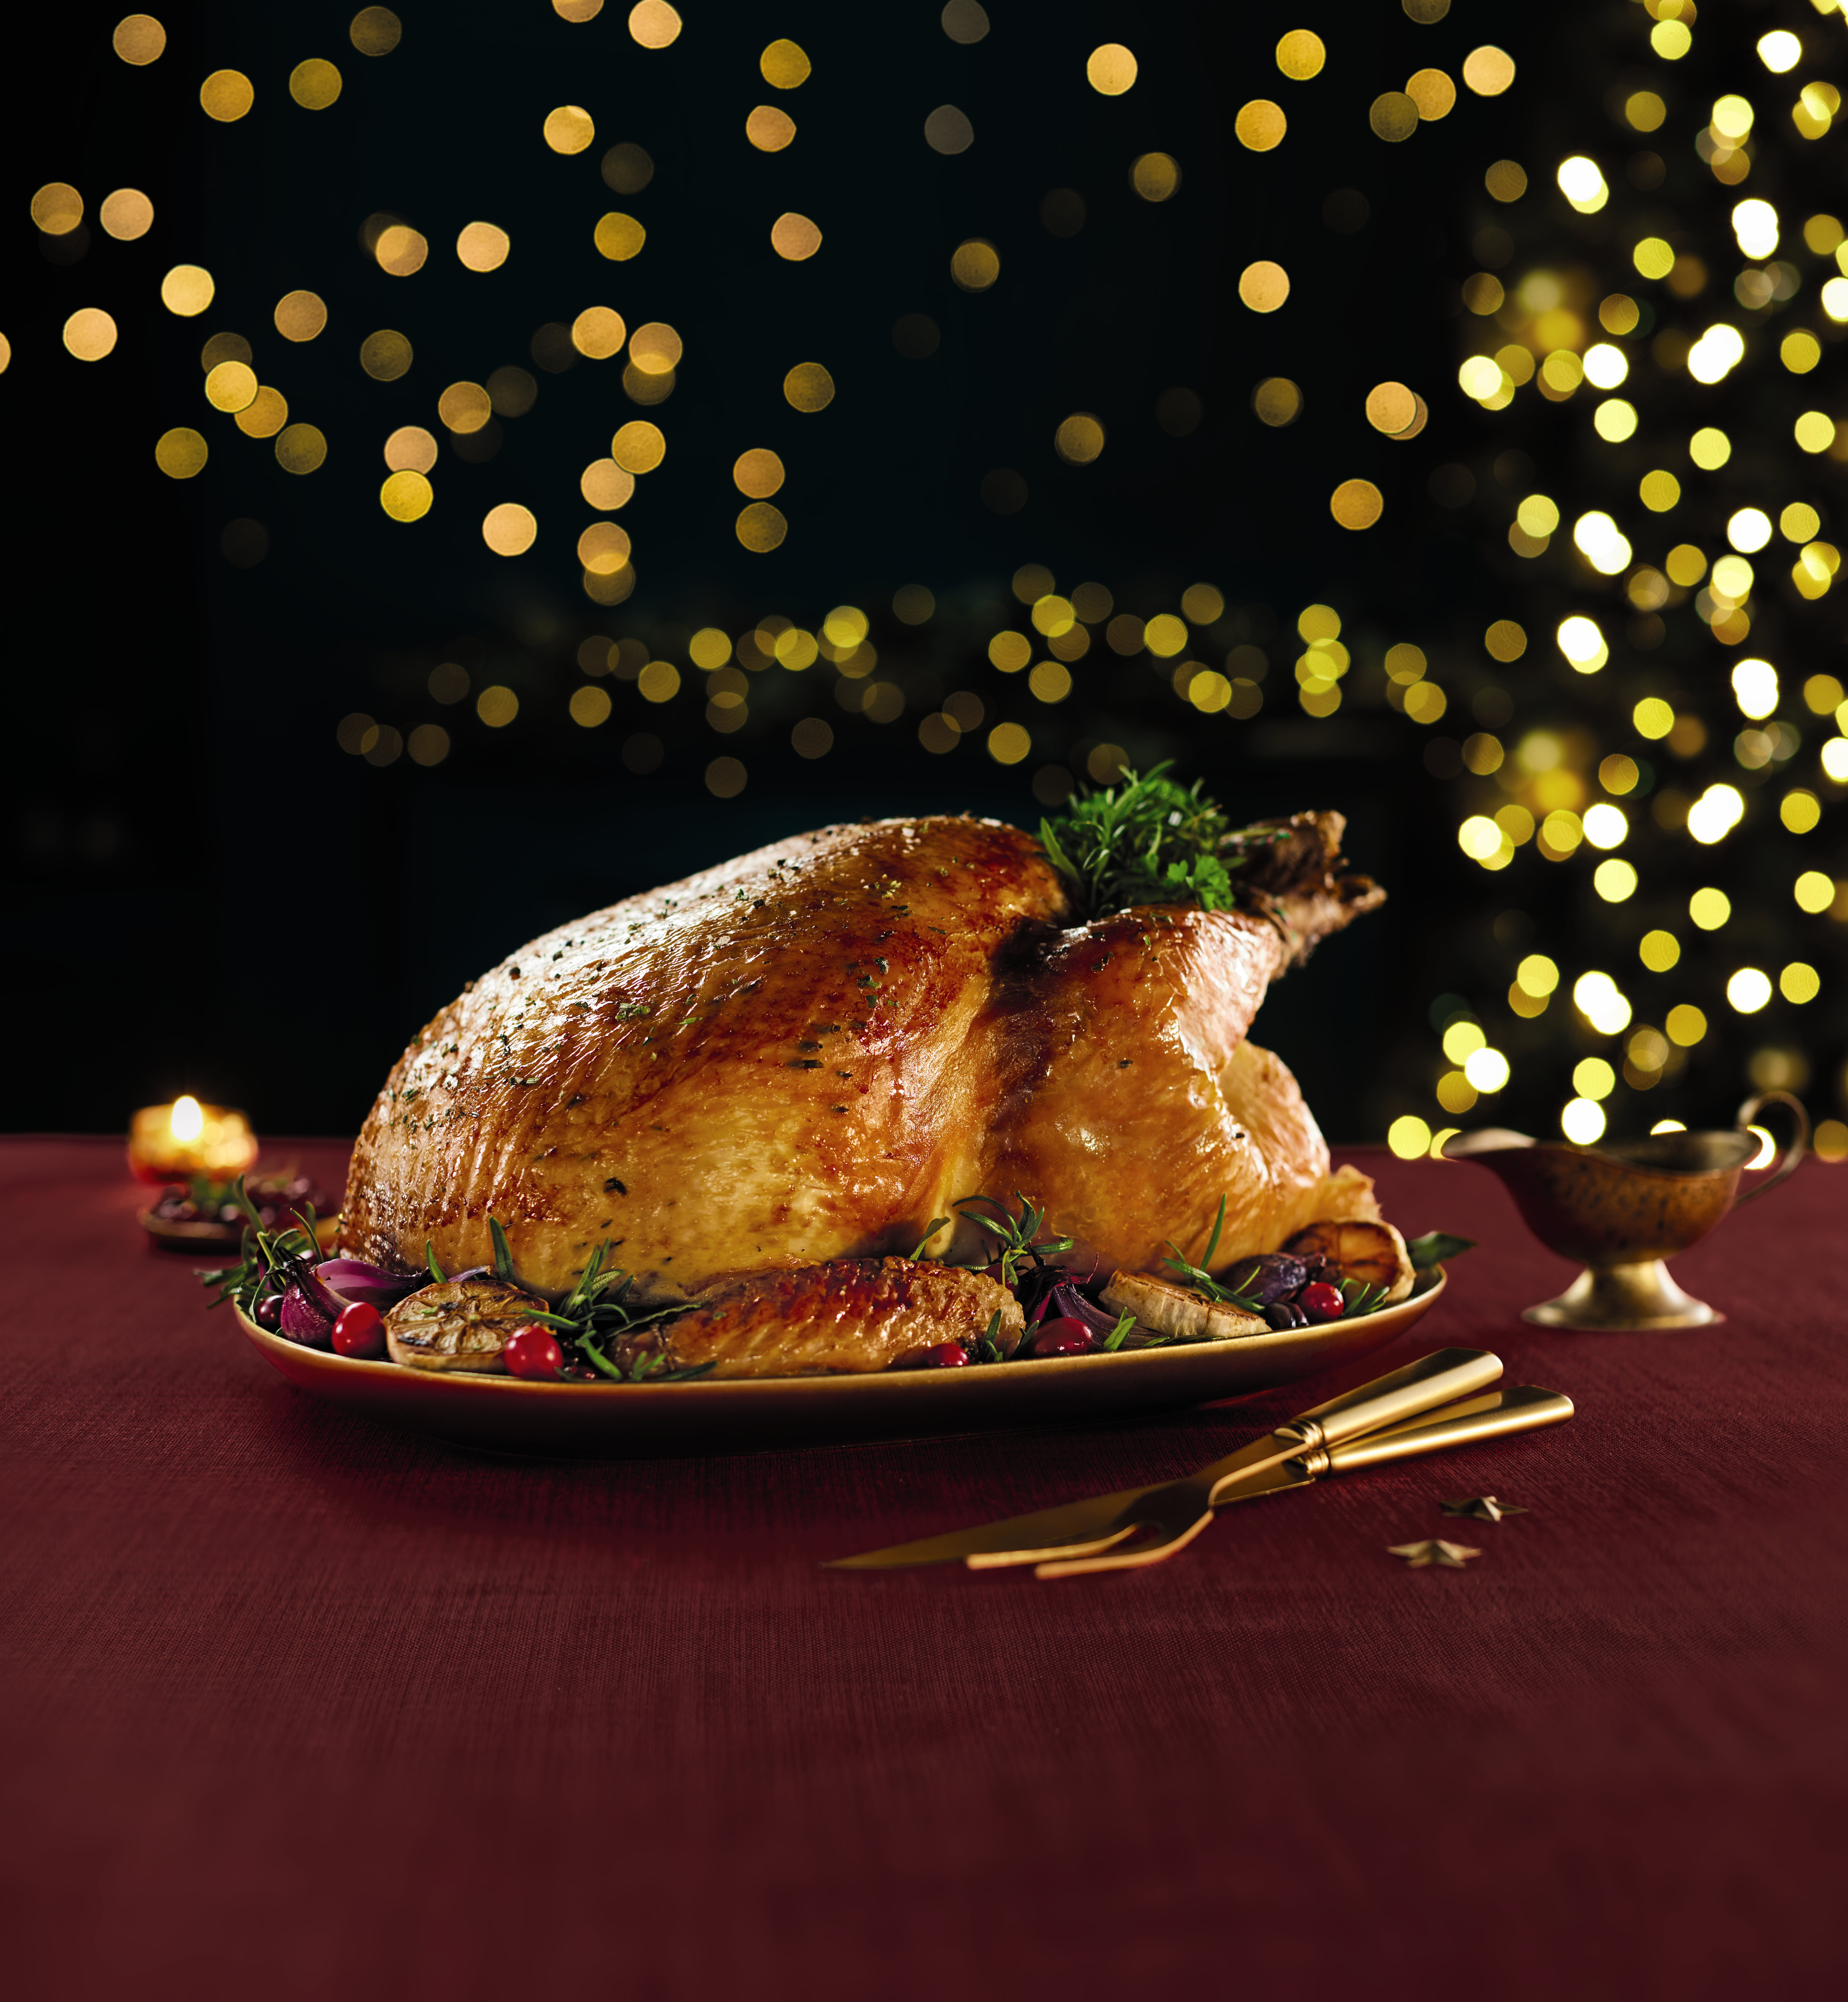 Perfectly cooked turkey, laid on a table of burgundy cloth with golden cutlery.